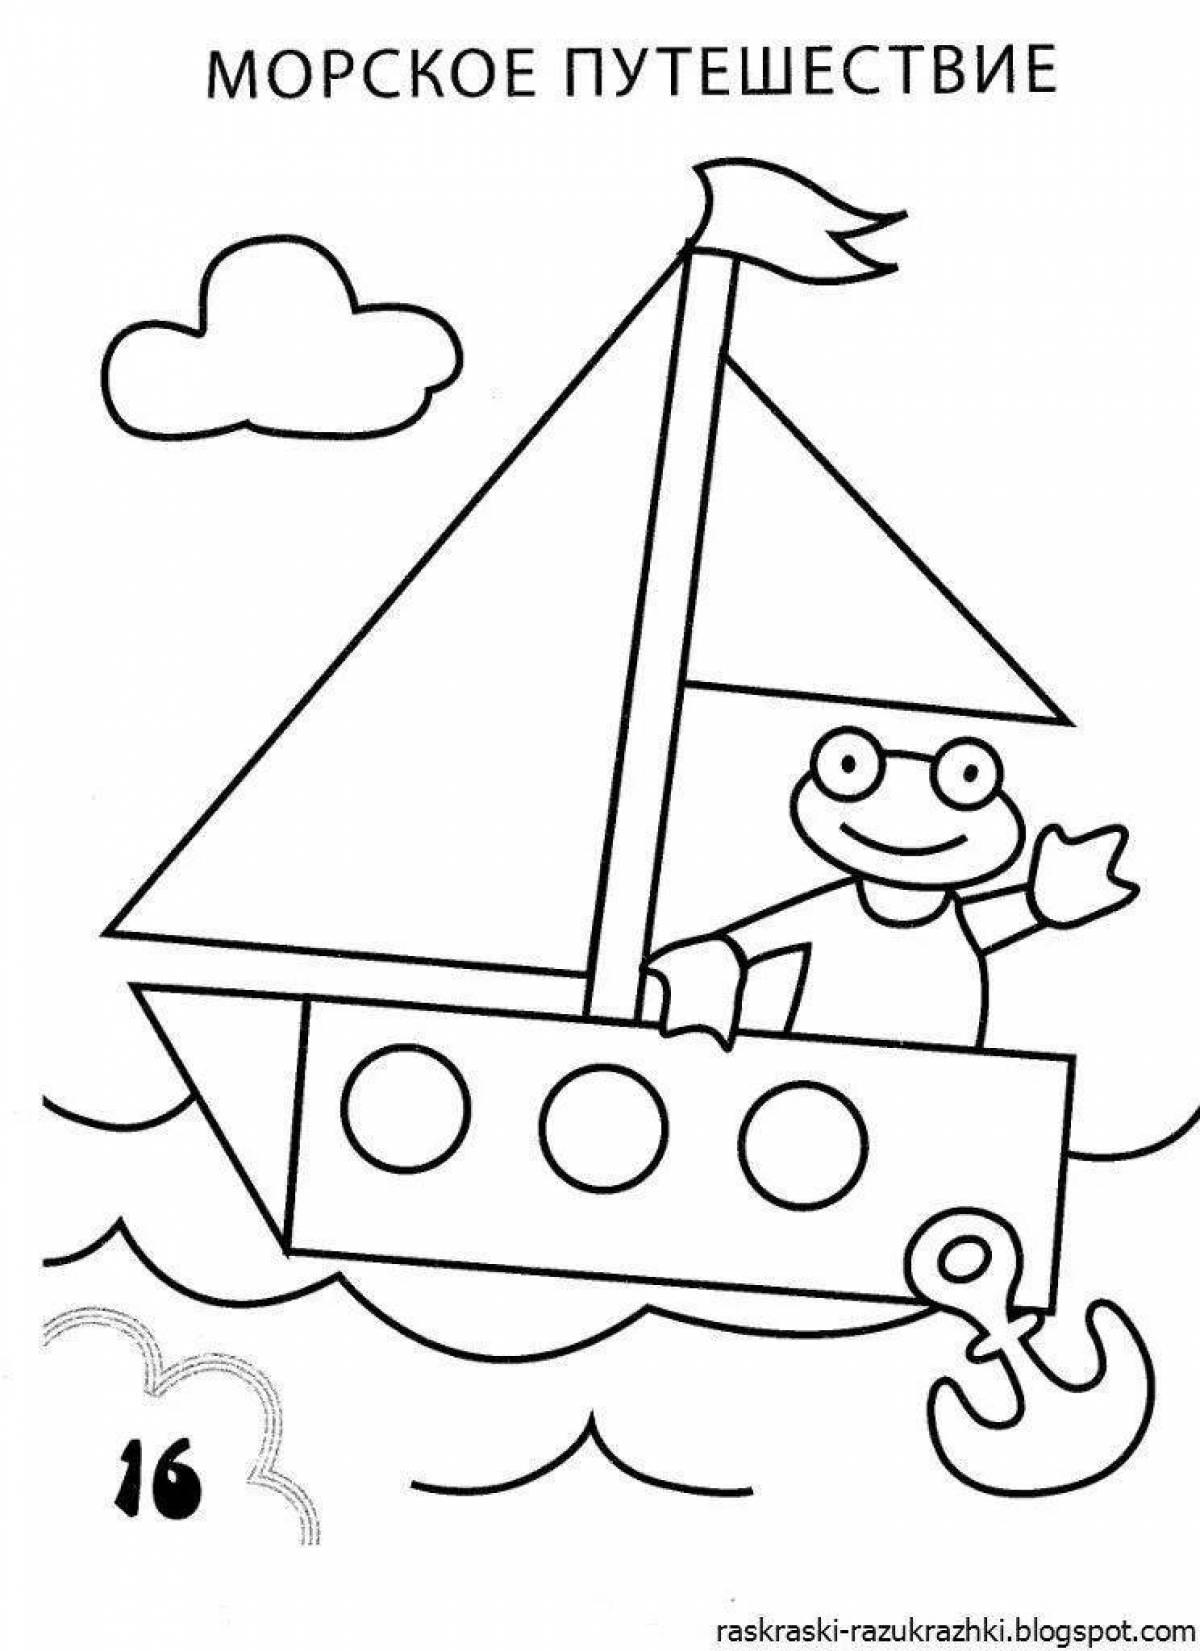 Fun coloring book for middle group children